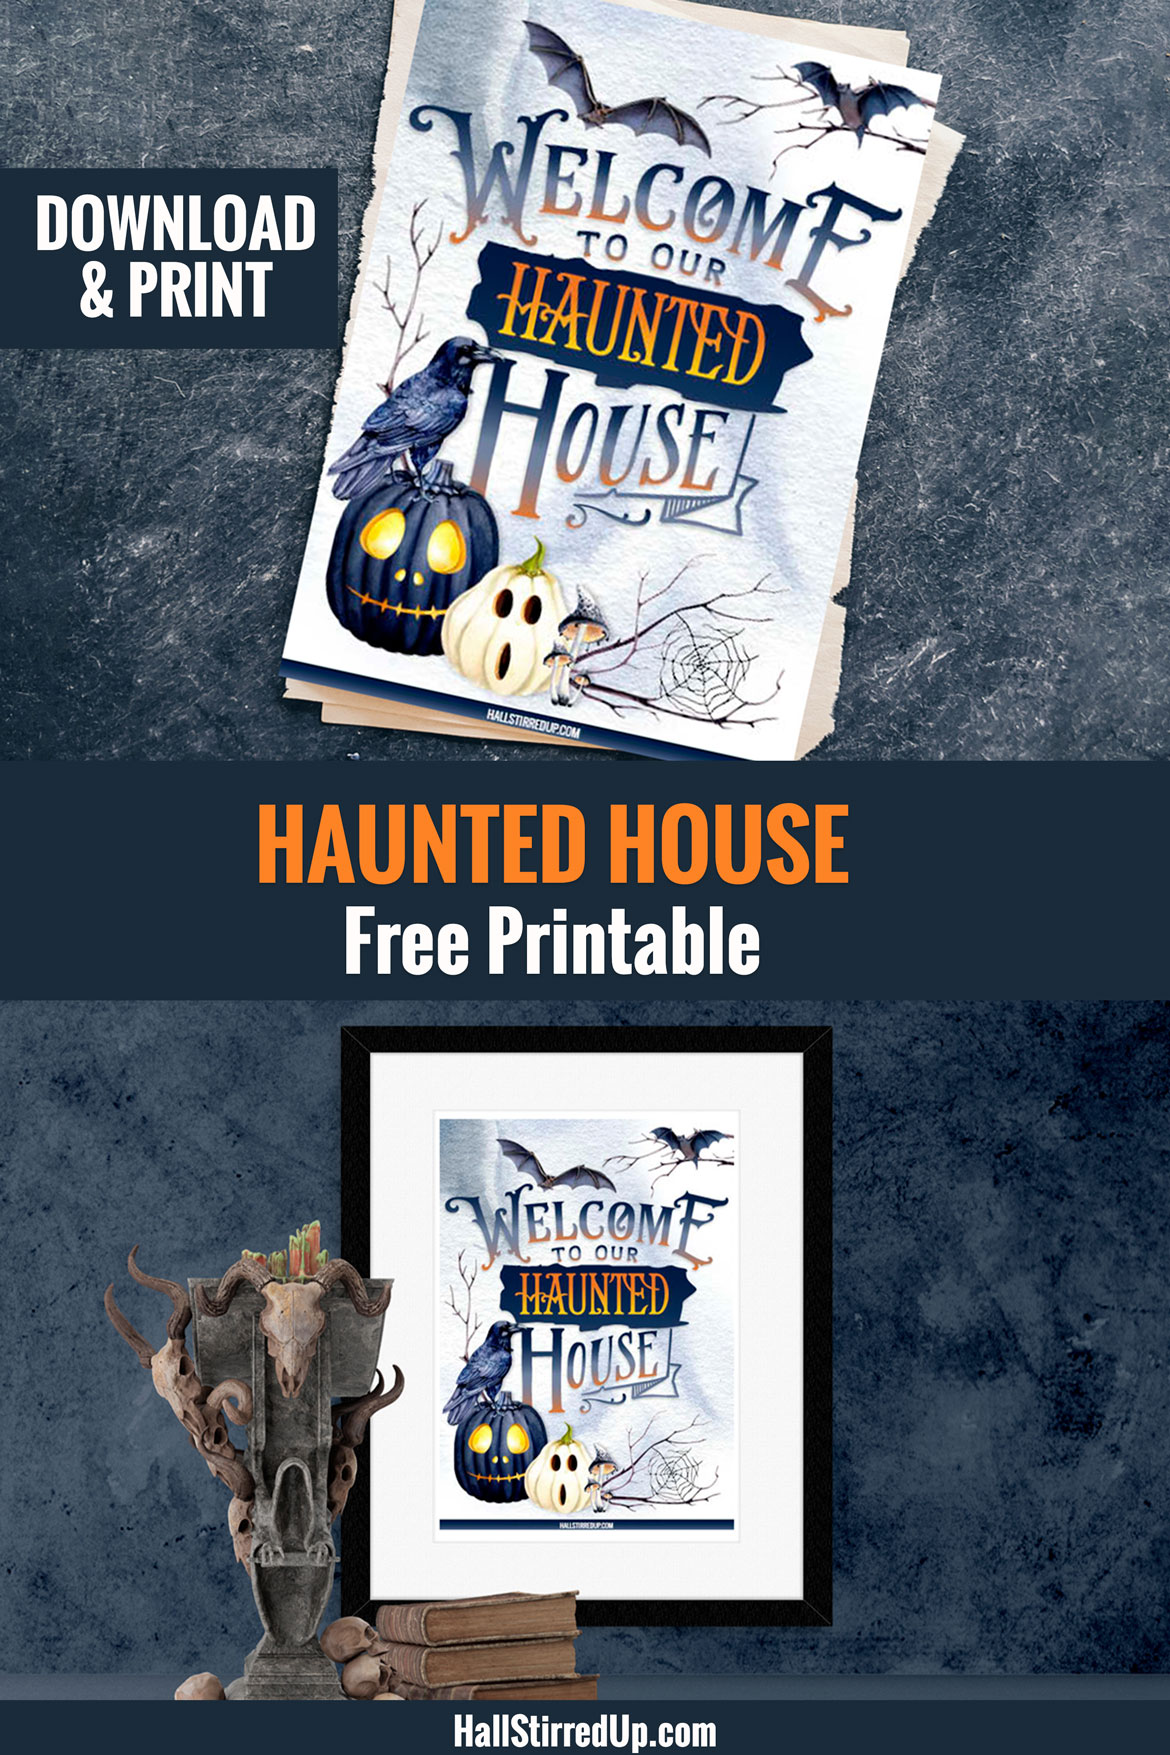 It's a Haunted House free printable